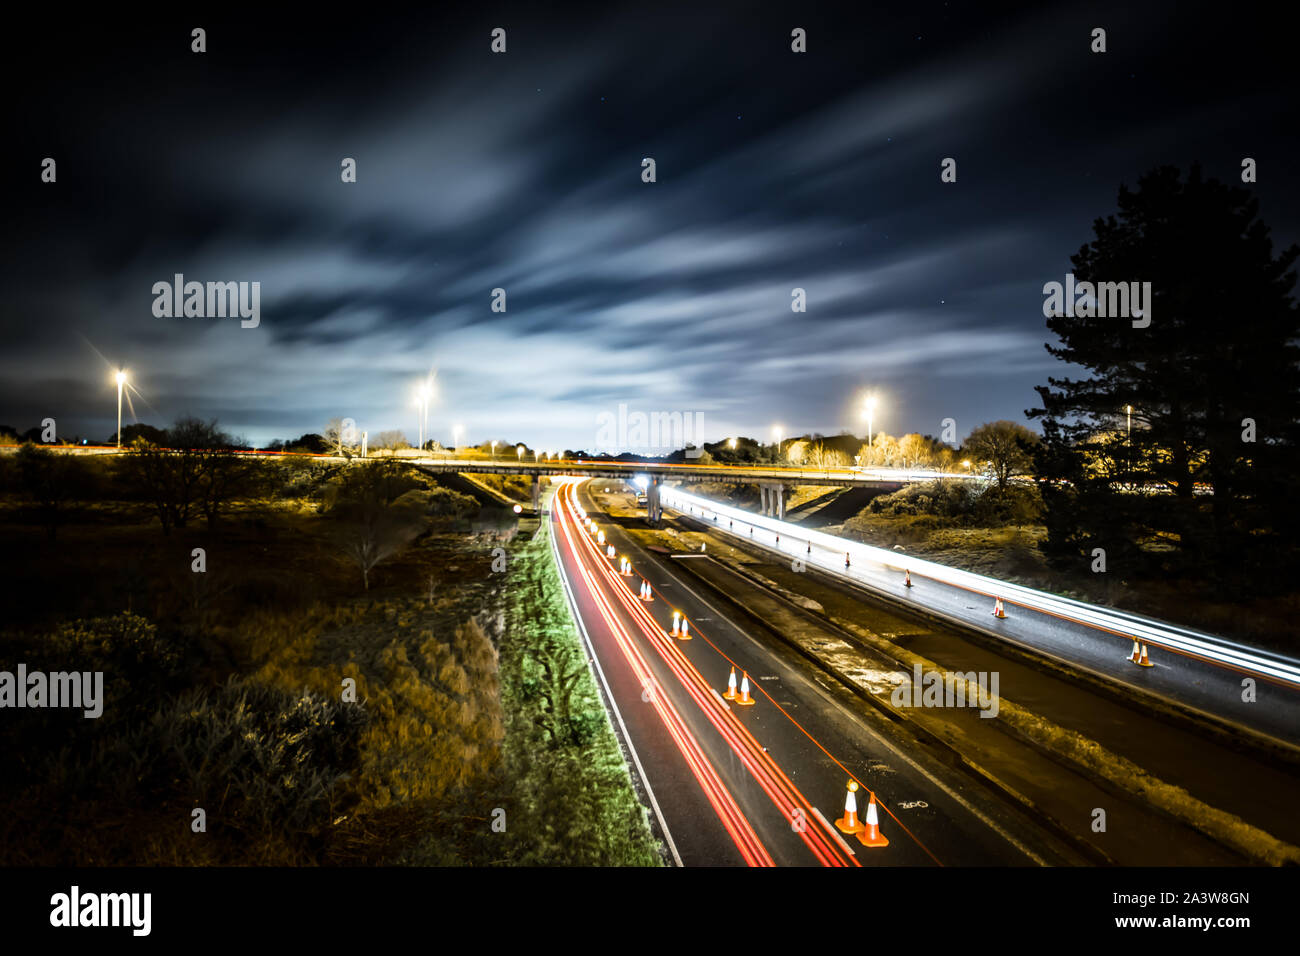 Roadworks on a dual carriageway at night showing light trails of cars passing by Stock Photo